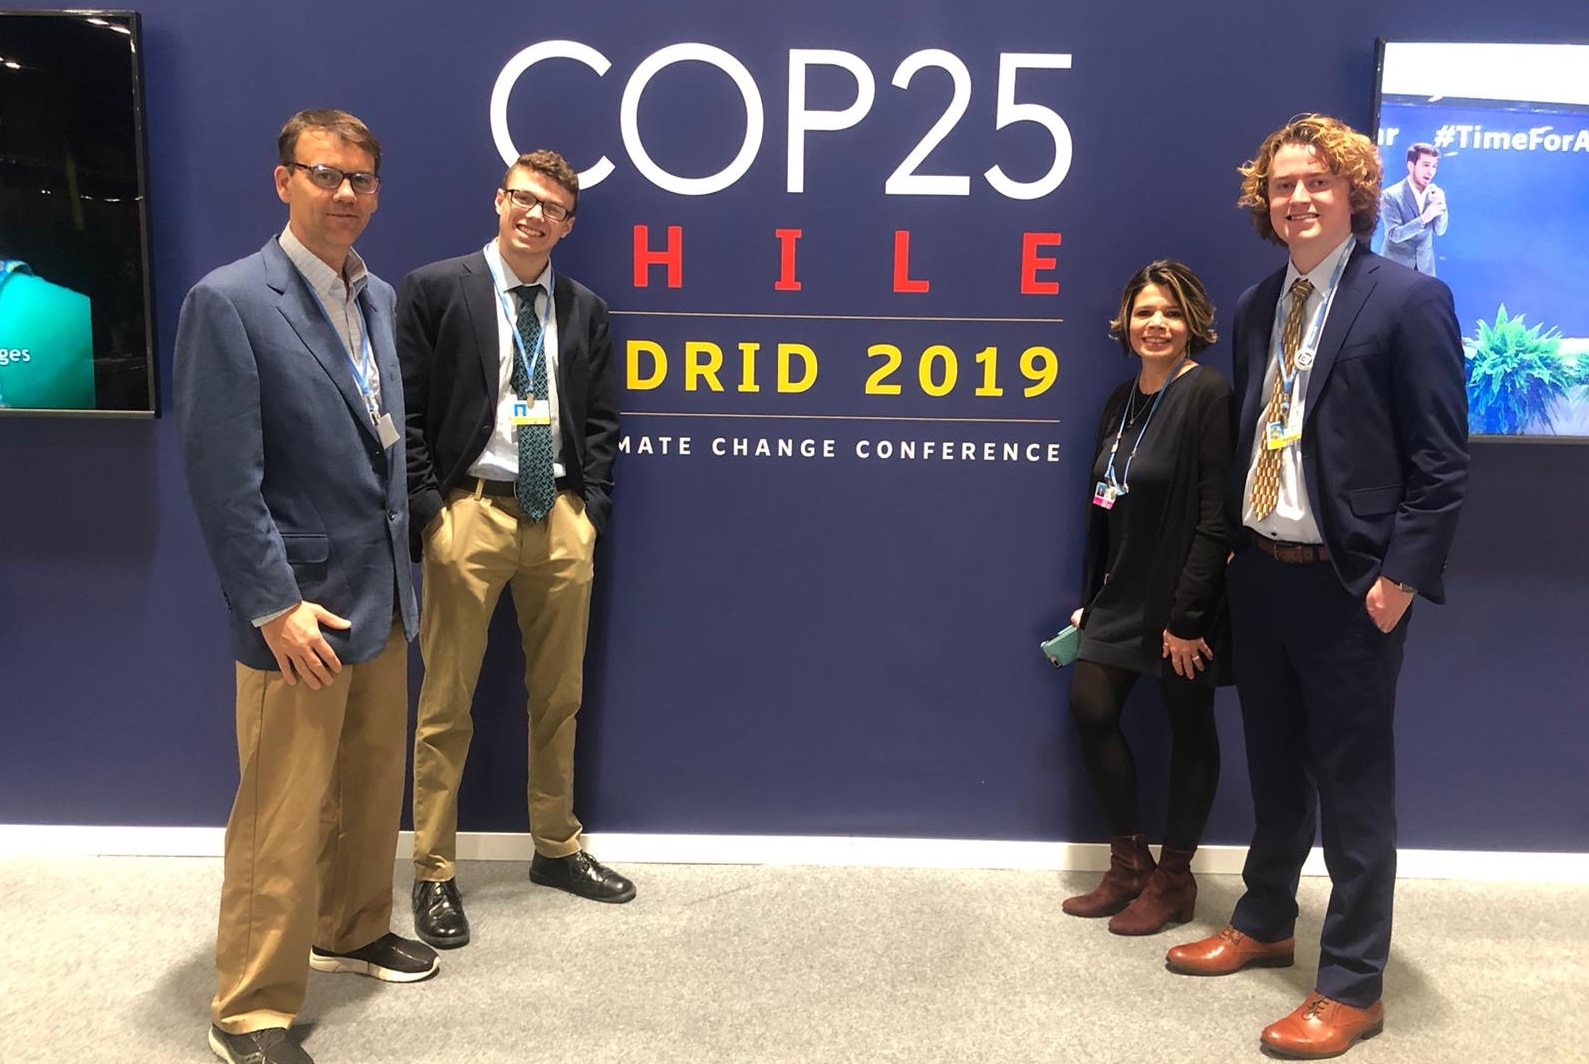 Three men and one woman standing in front of a large wall hanging for COP25 Chile Madrid 2019.